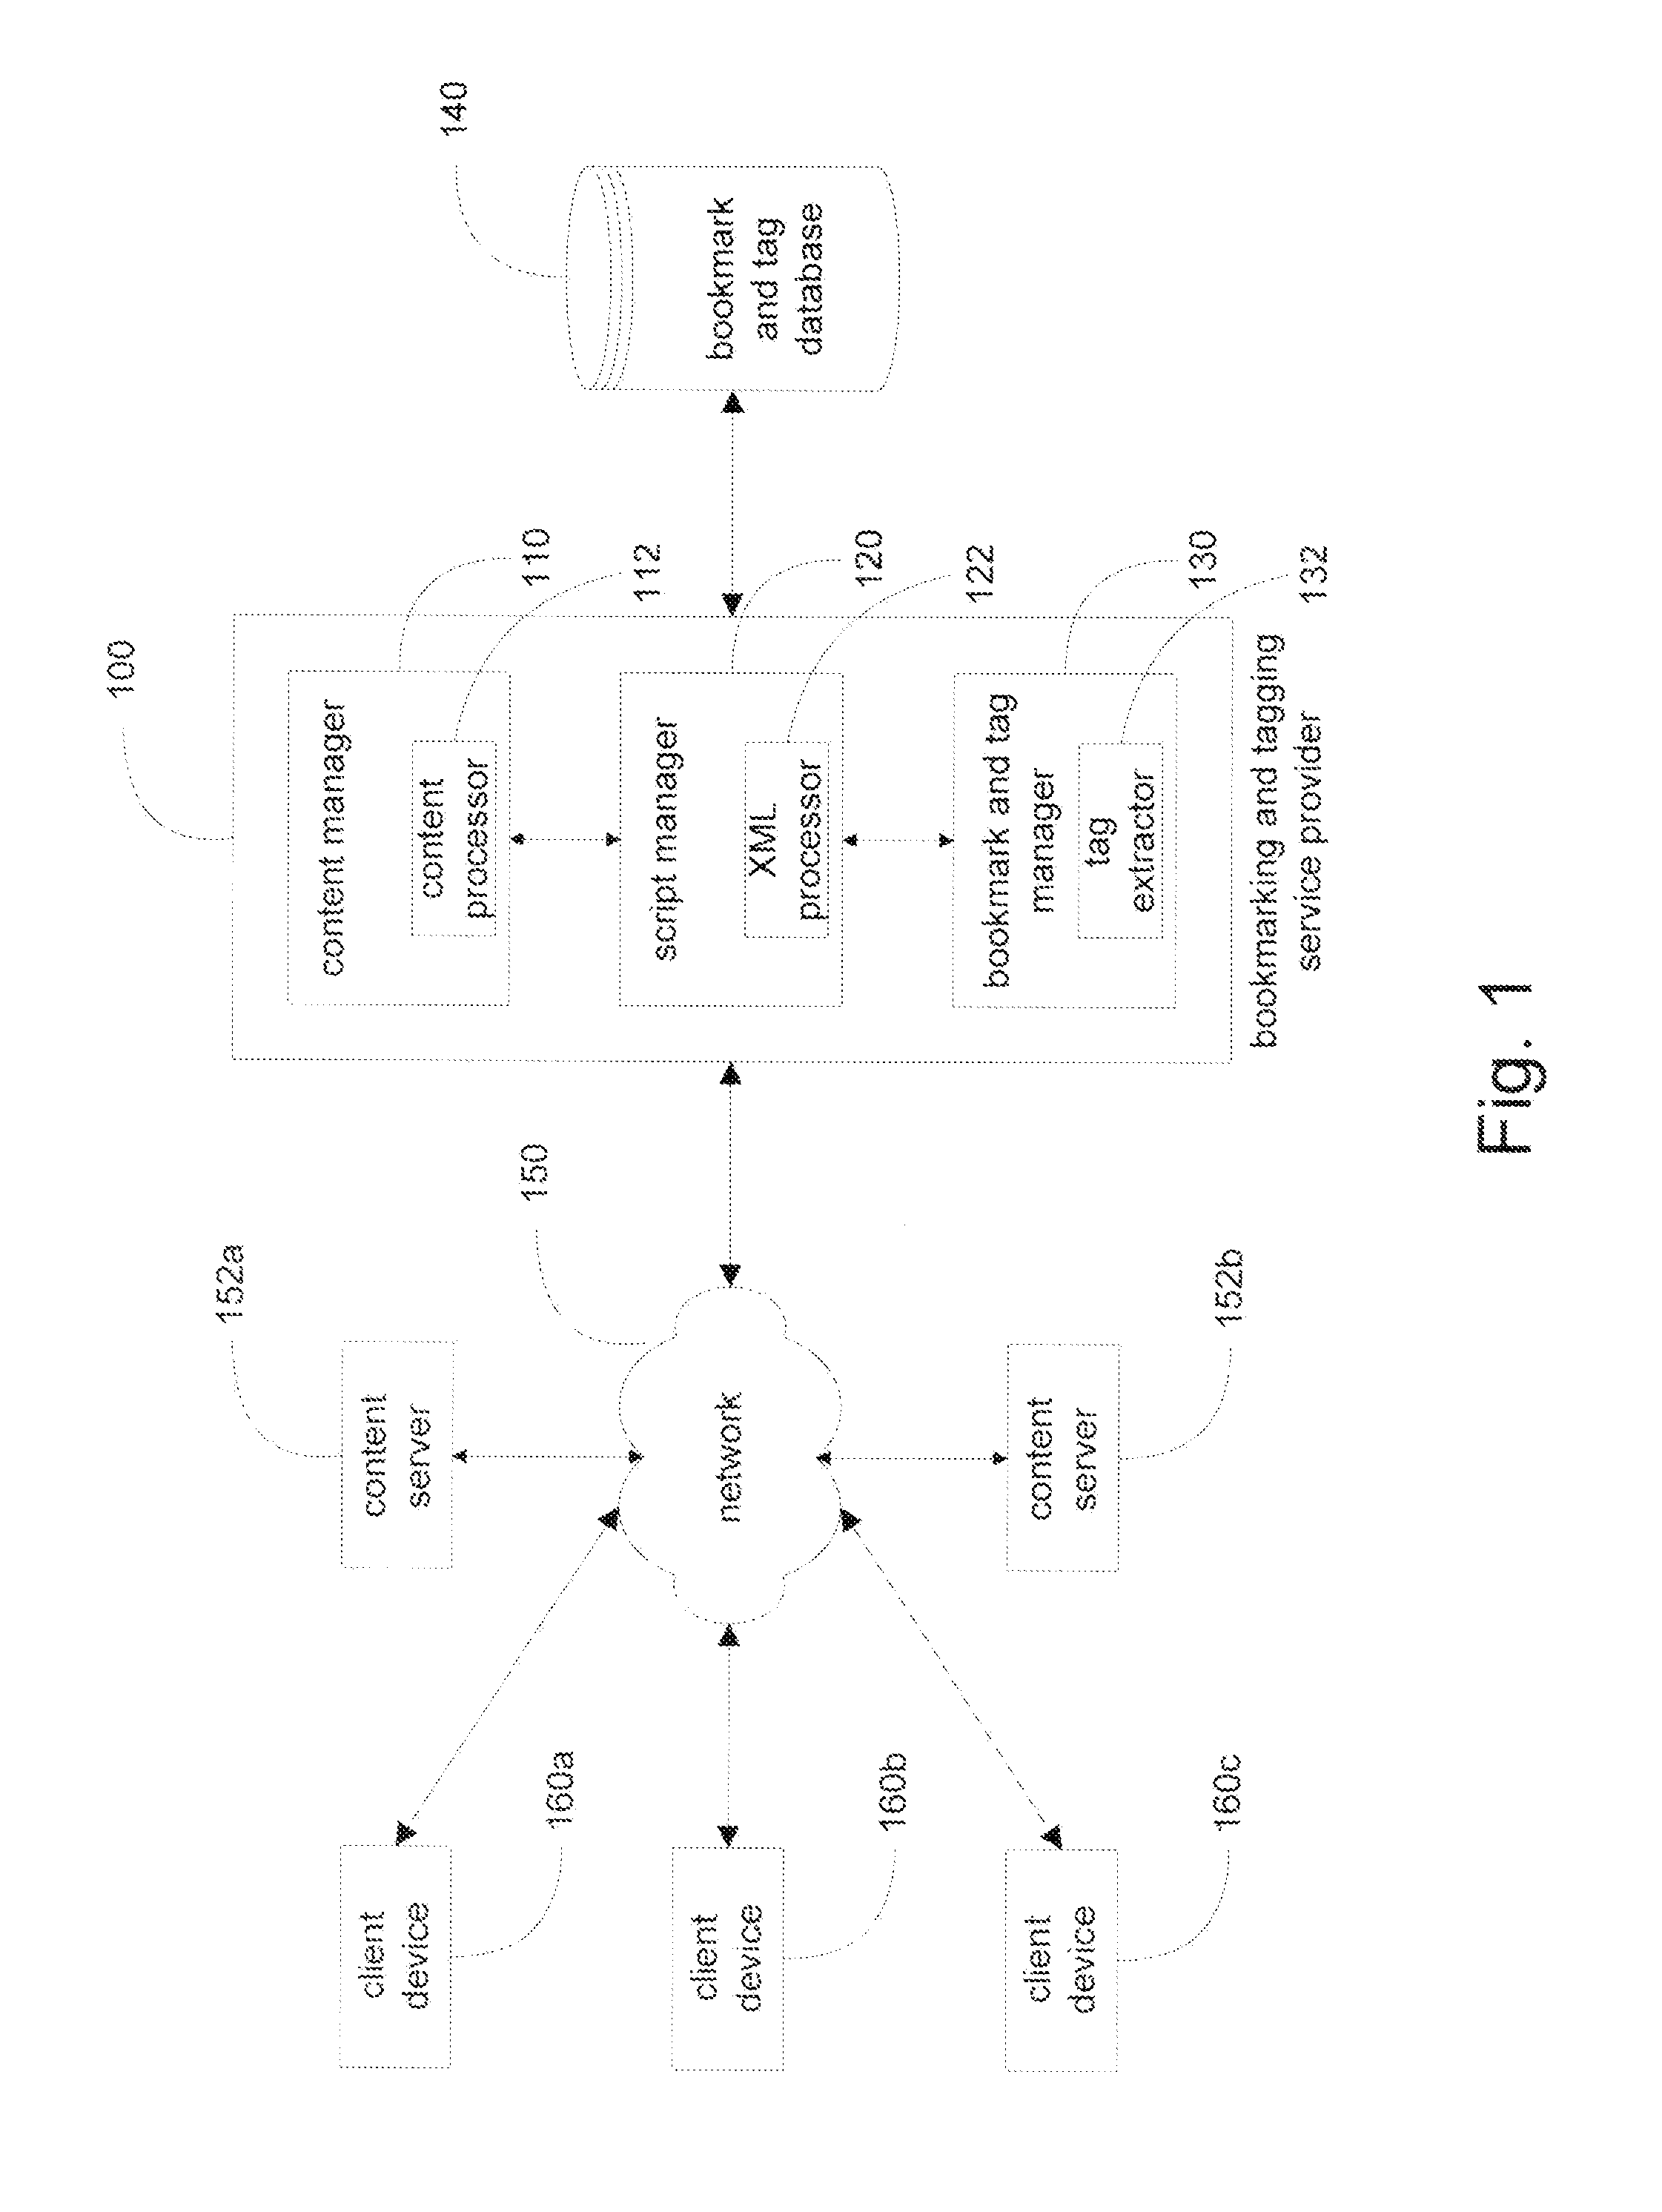 System and method for bookmarking and auto-tagging a content item based on file type